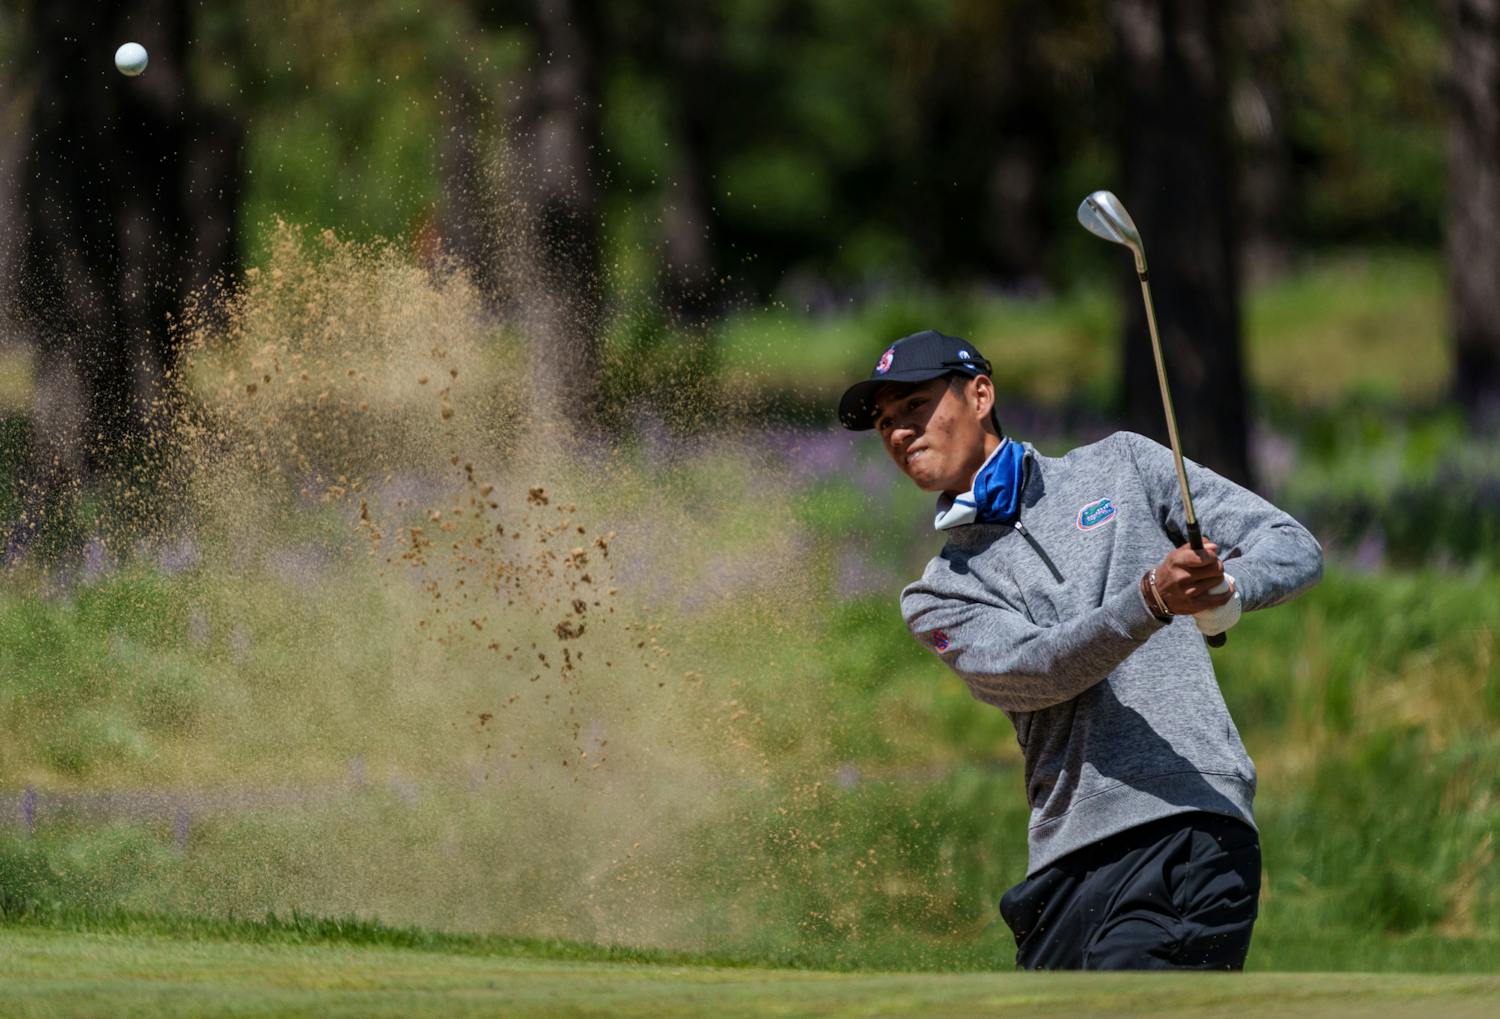 Florida&#x27;s Ricky Castillo competes in the first round of the 2021 NCAA  Cle Elum Regional at Tumble Creek Golf Club in Cle Elum, Washington, on May 19, 2021. (Photography by Stephen Brashear/Red Box Pictures)